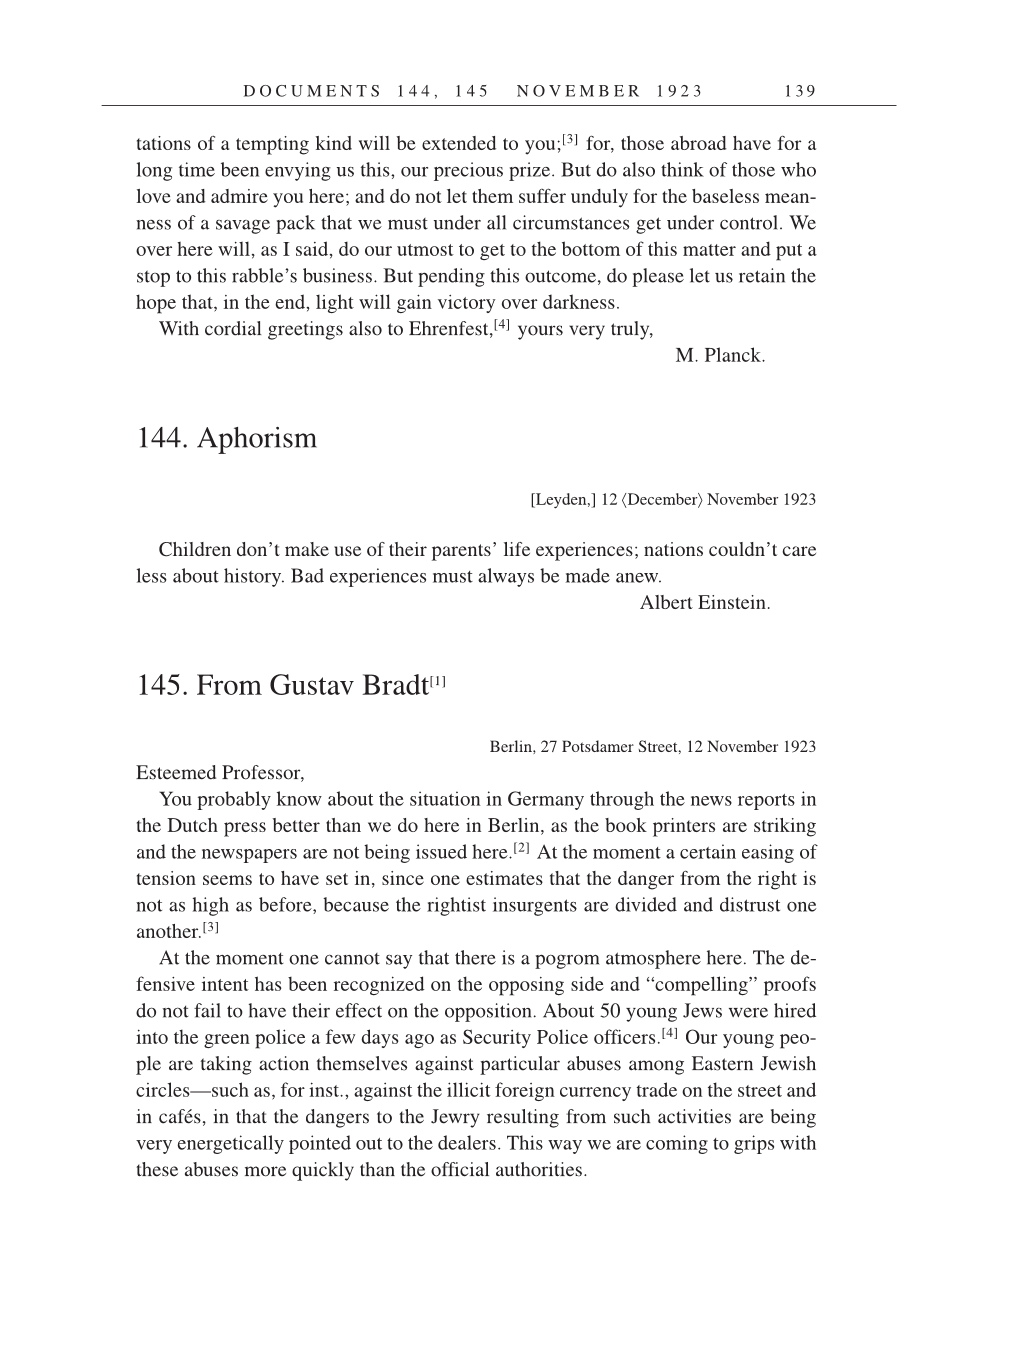 Volume 14: The Berlin Years: Writings & Correspondence, April 1923-May 1925 (English Translation Supplement) page 139